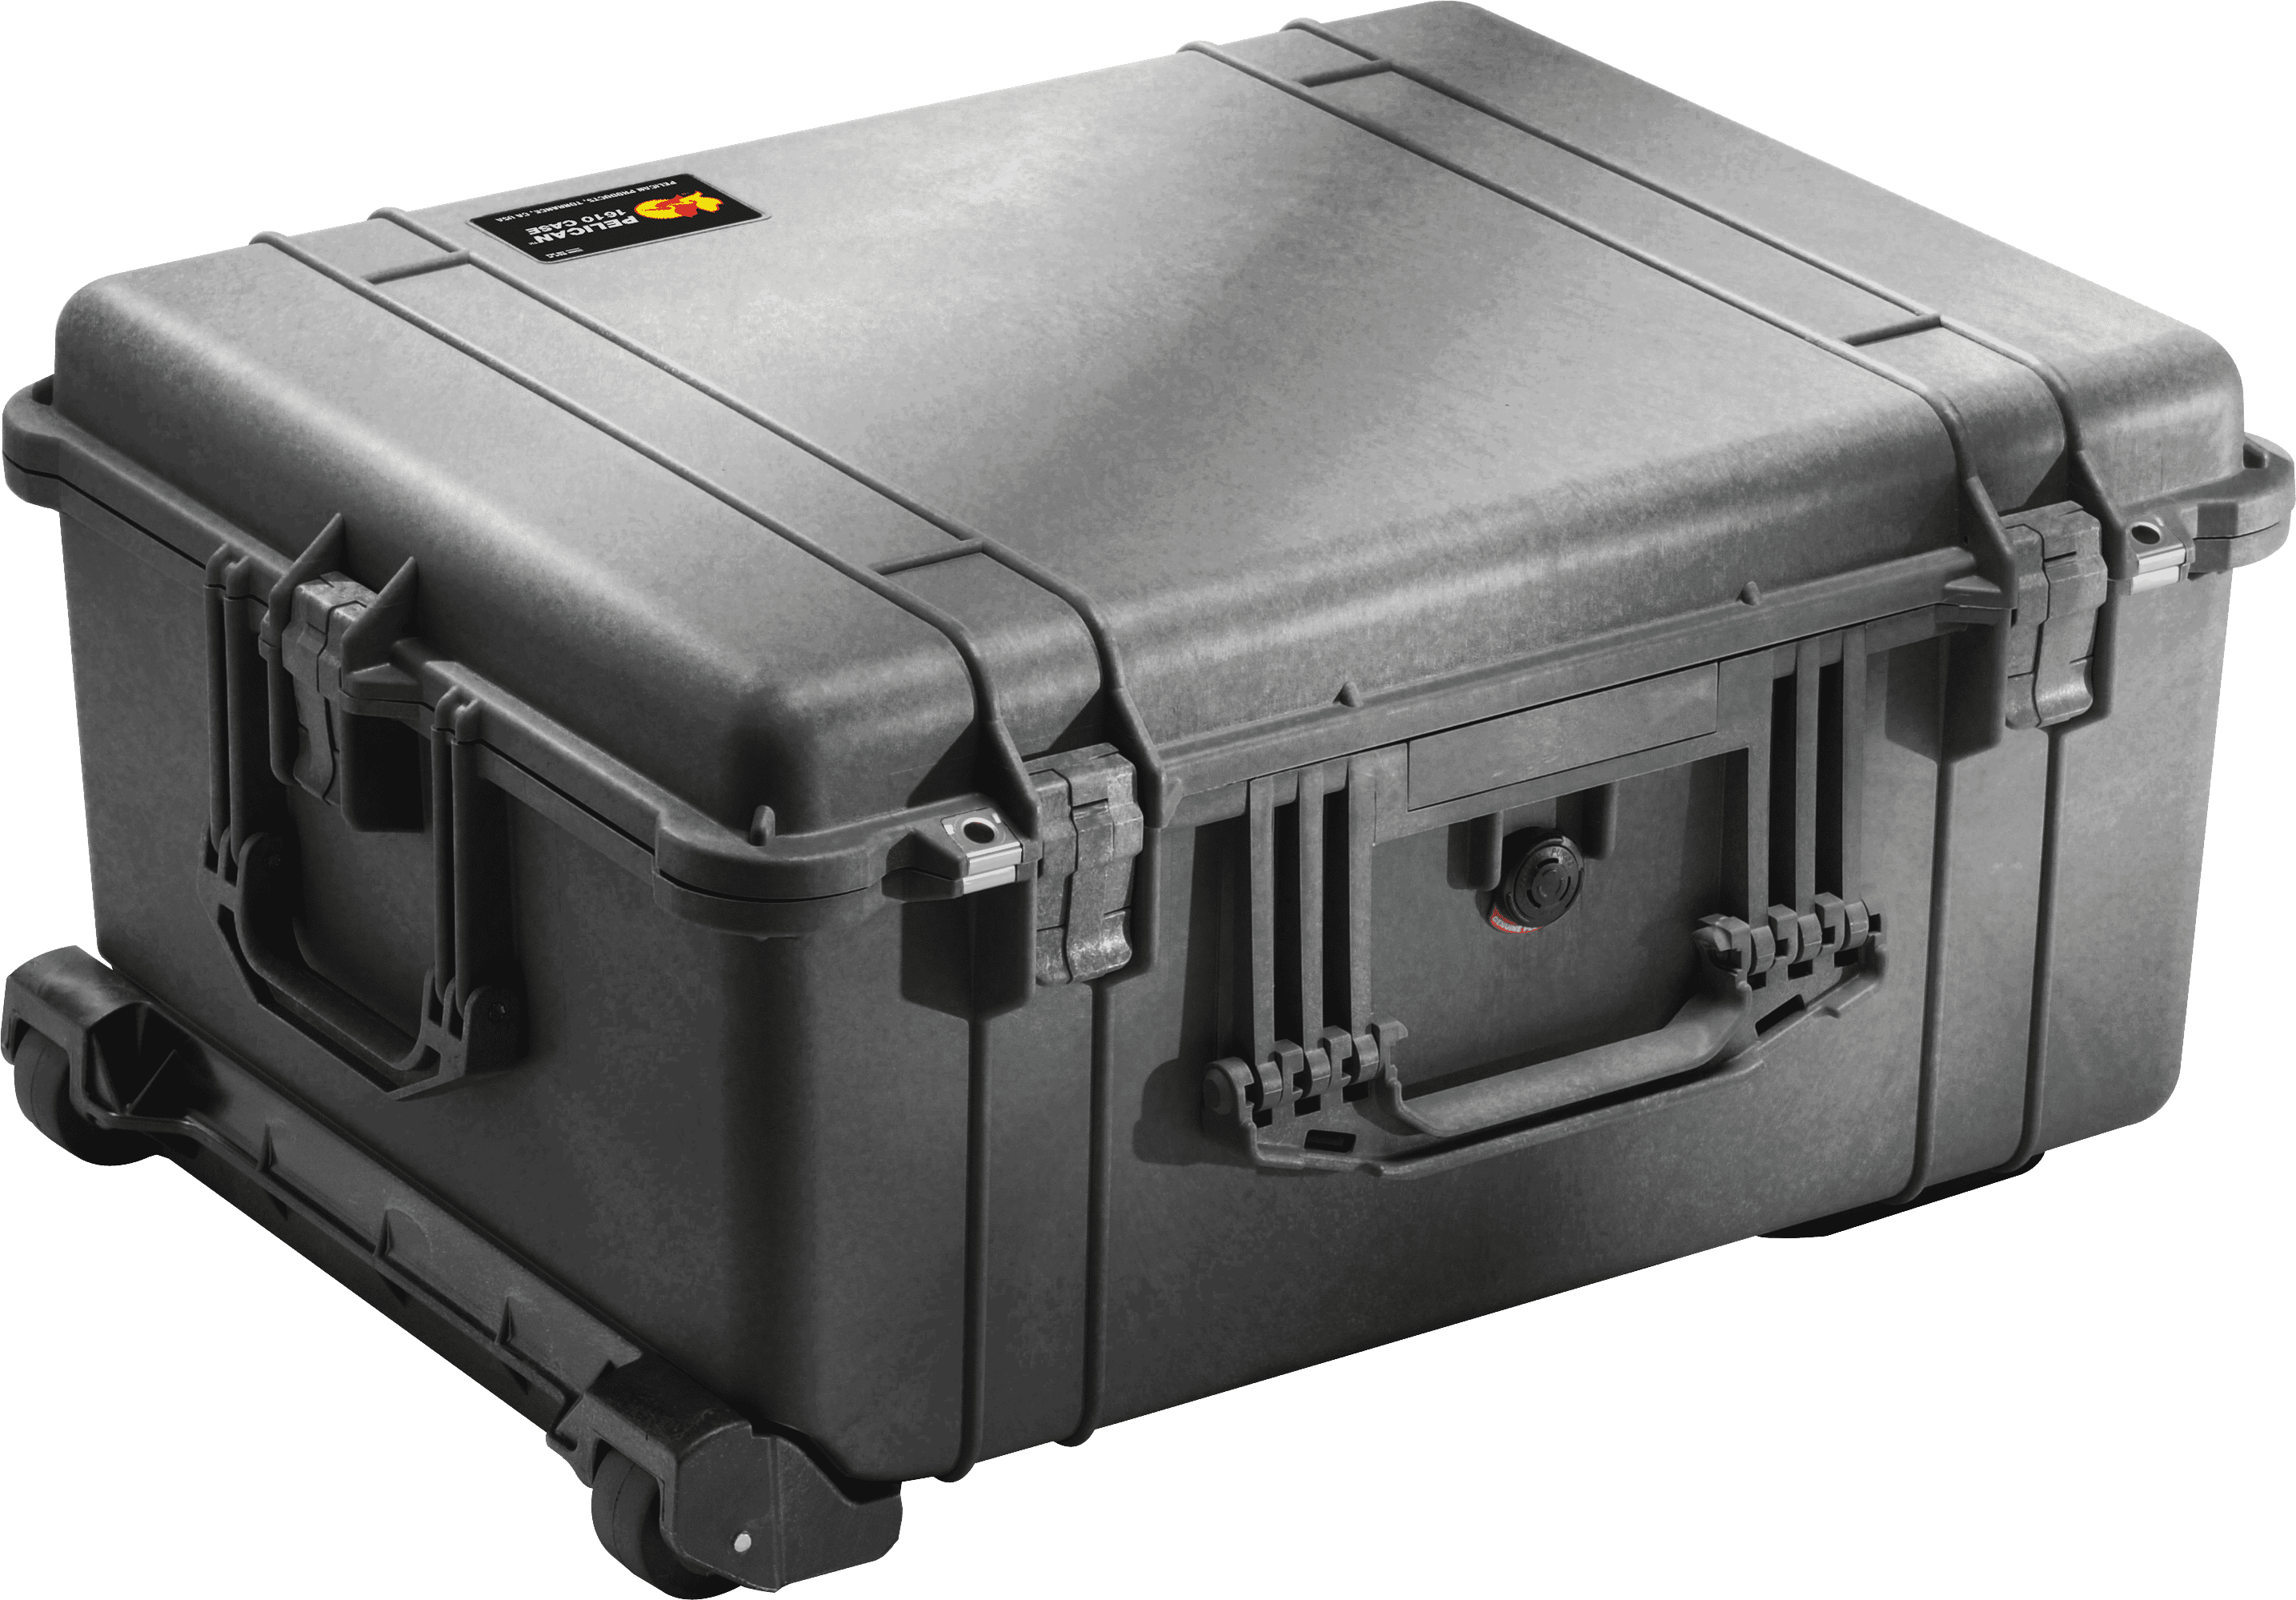 Pelican Products 1610 Protector Case - Bags & Packs